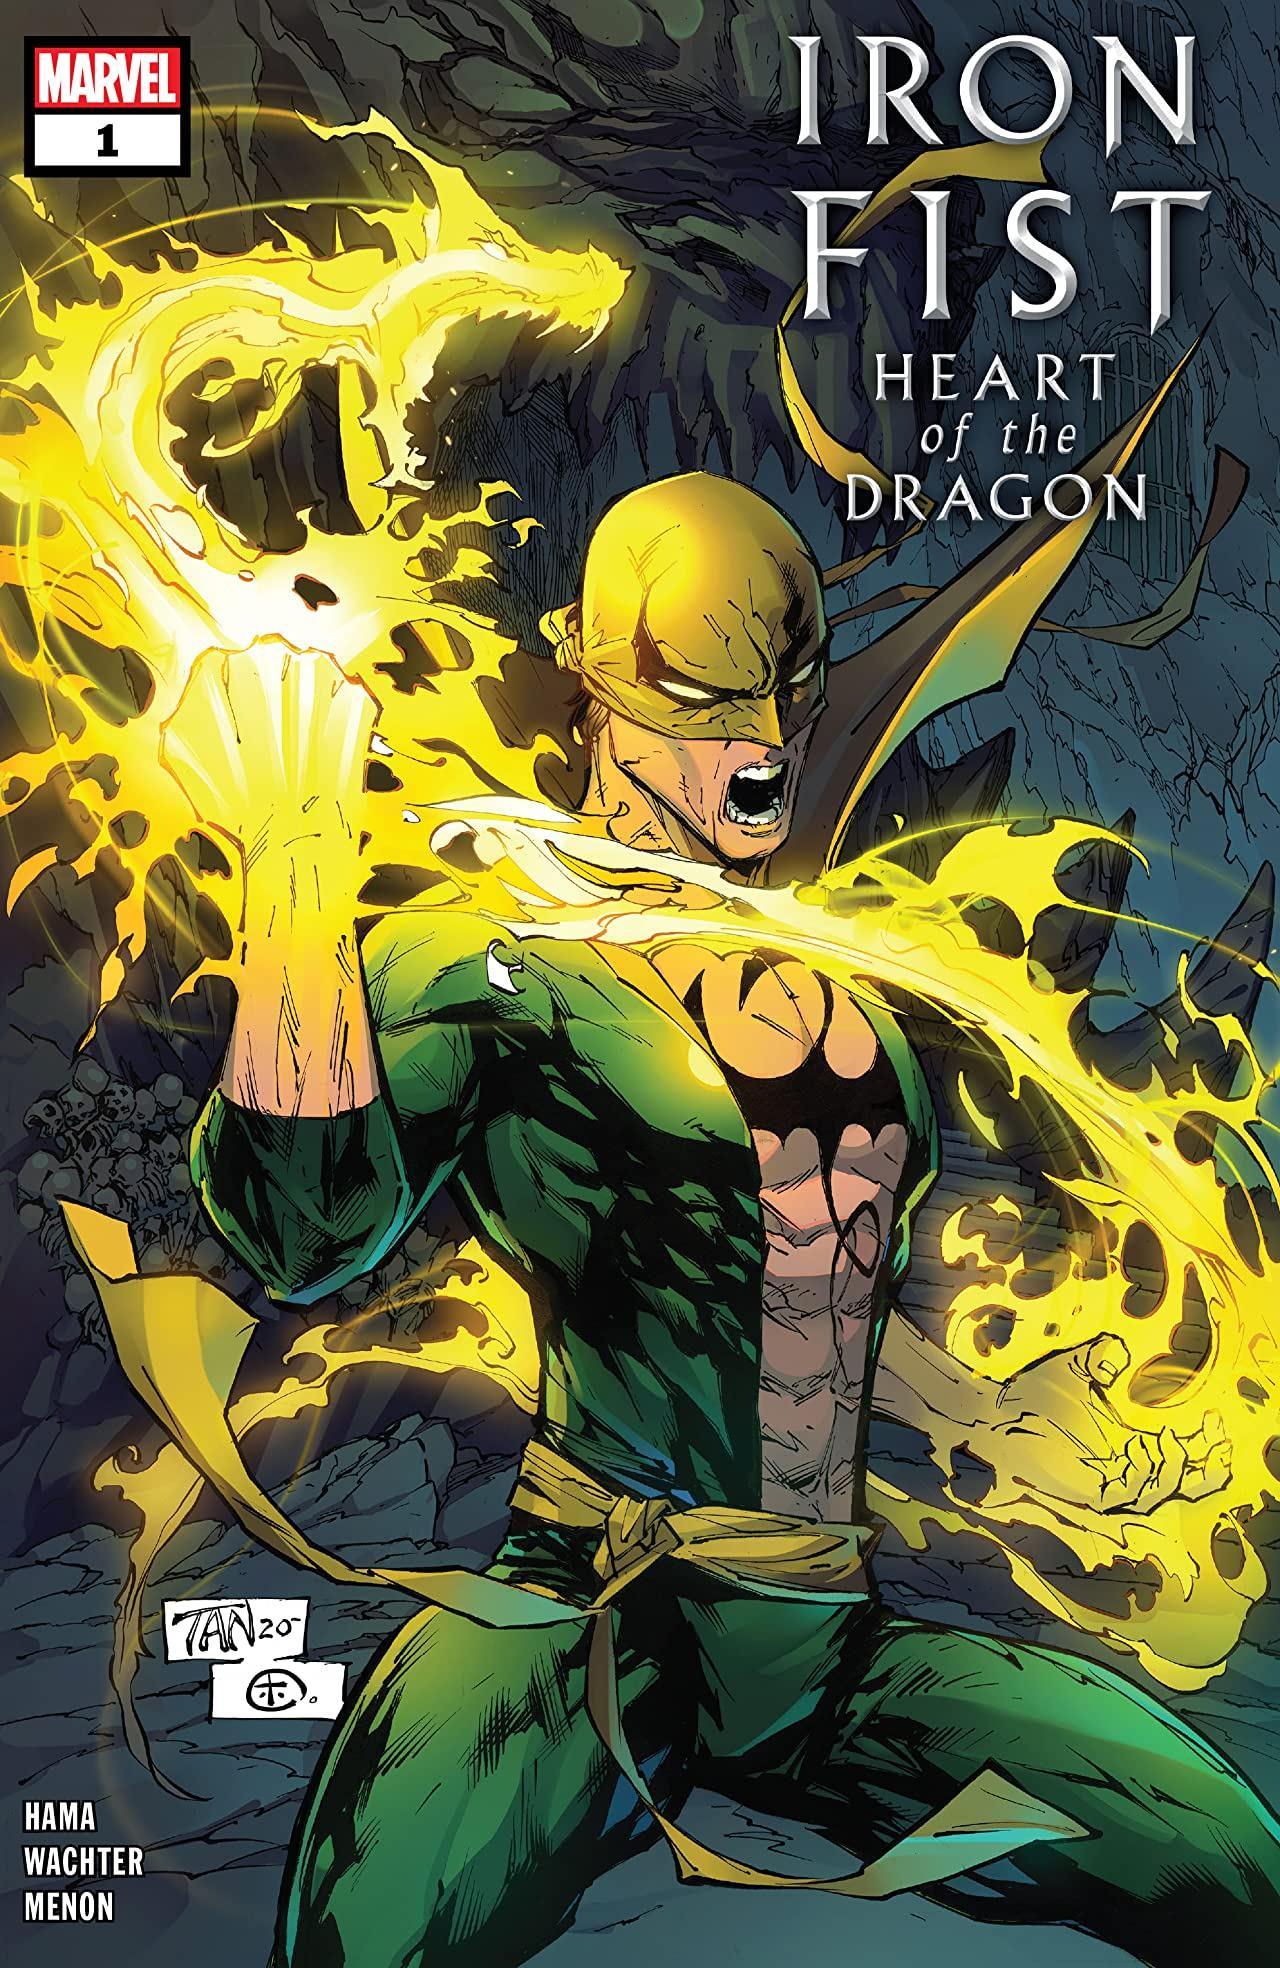 IRON FIST HEART OF THE DRAGON BILLY TAN FOLDED PROMO POSTER - Kings Comics